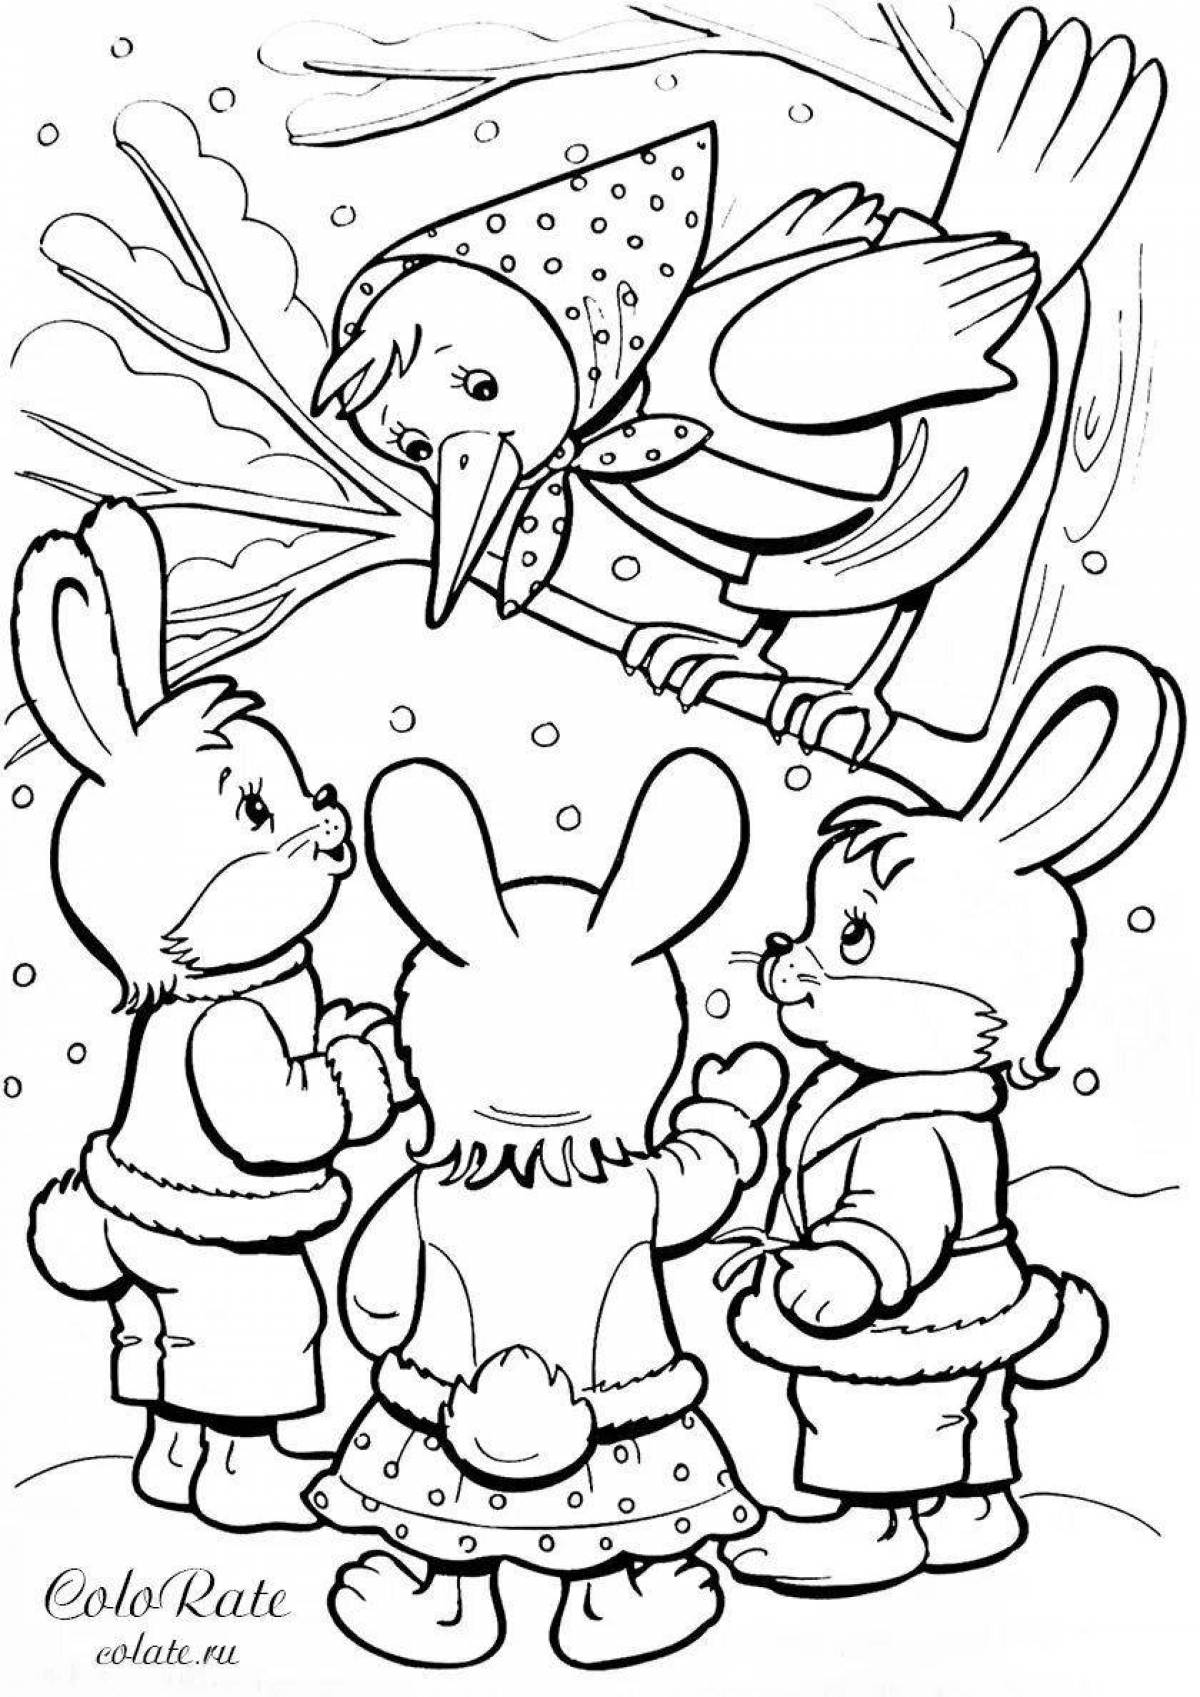 Heroic hare coloring page